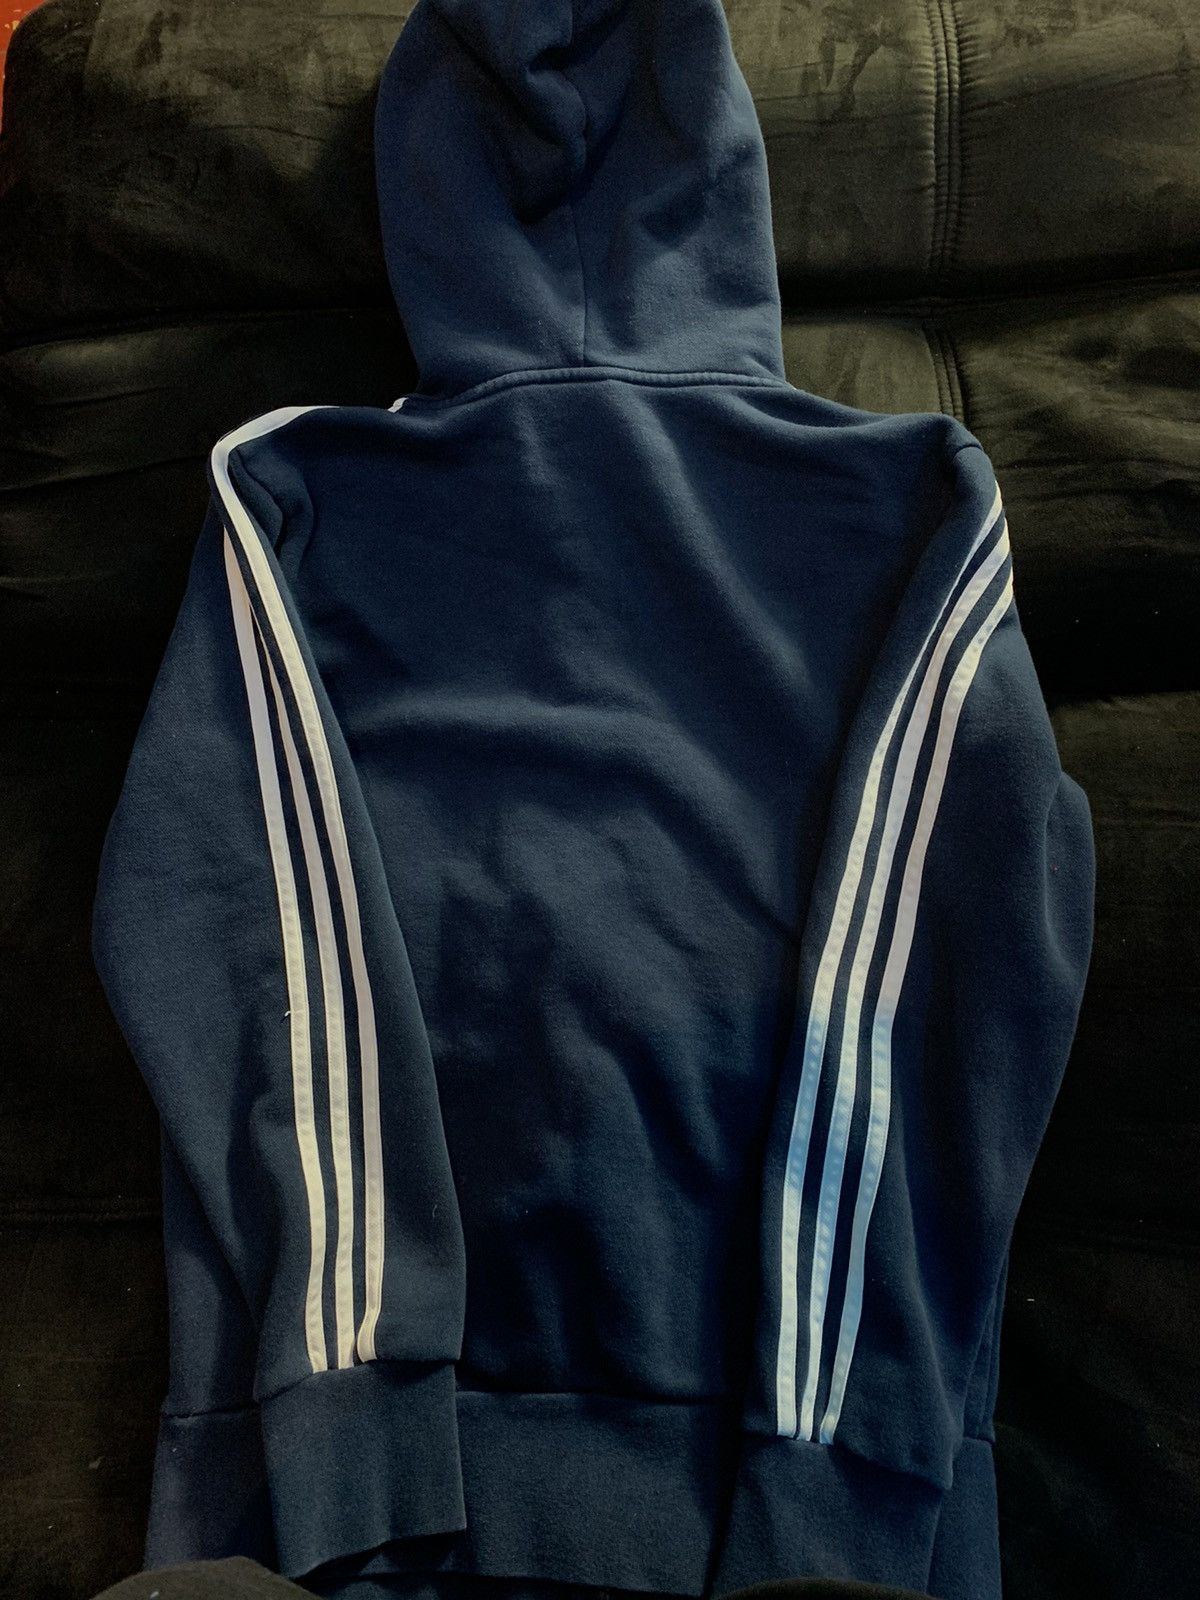 Adidas Adidas Navy Blue zip up hoodie Size US S / EU 44-46 / 1 - 3 Preview